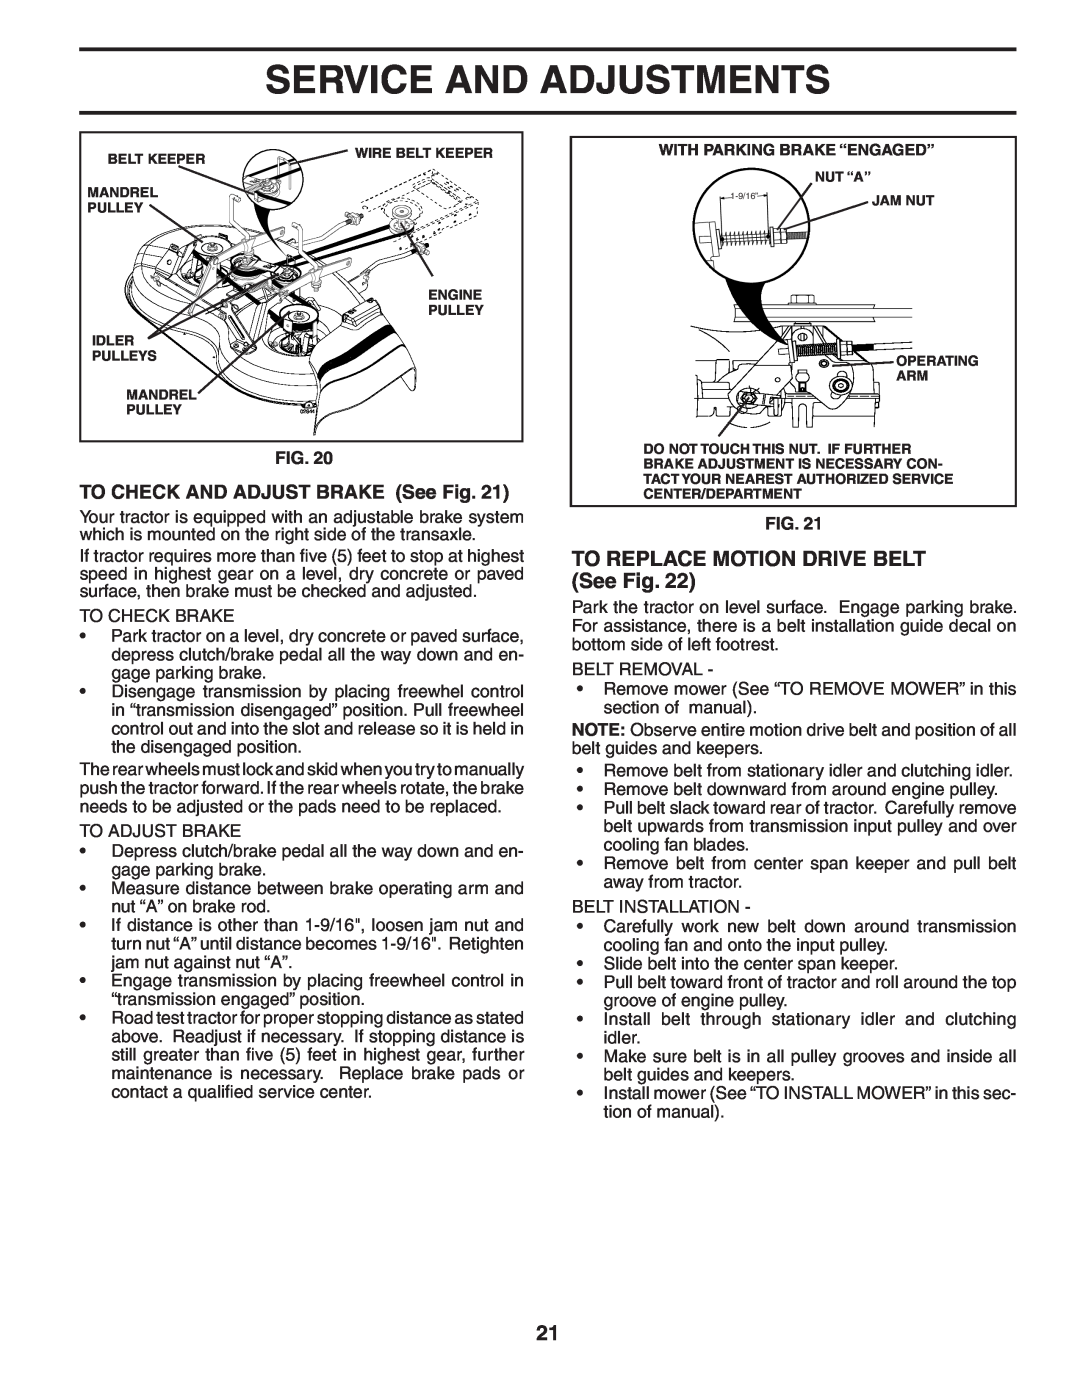 McCulloch 96011013201 TO REPLACE MOTION DRIVE BELT See Fig, Service And Adjustments, TO CHECK AND ADJUST BRAKE See Fig 